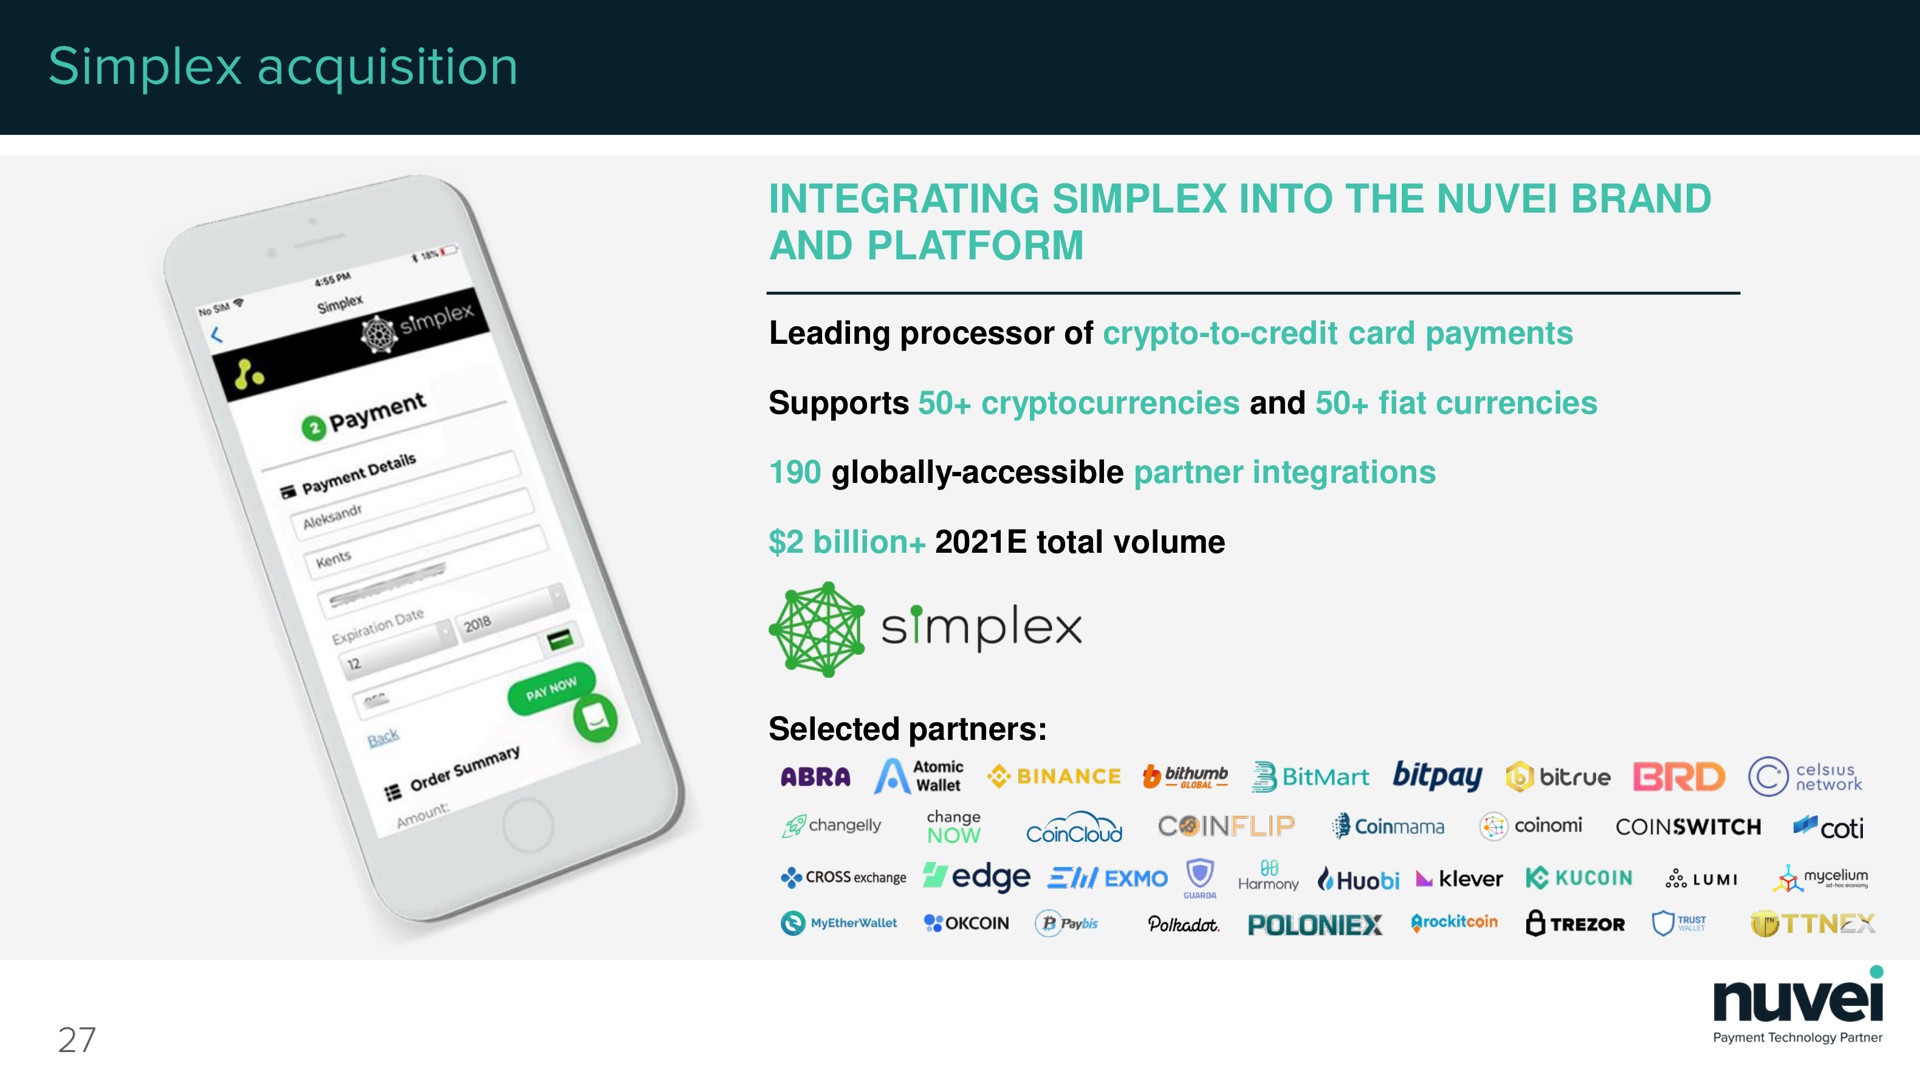 integrating simplex into the brand and platform acquisition | Nuvei